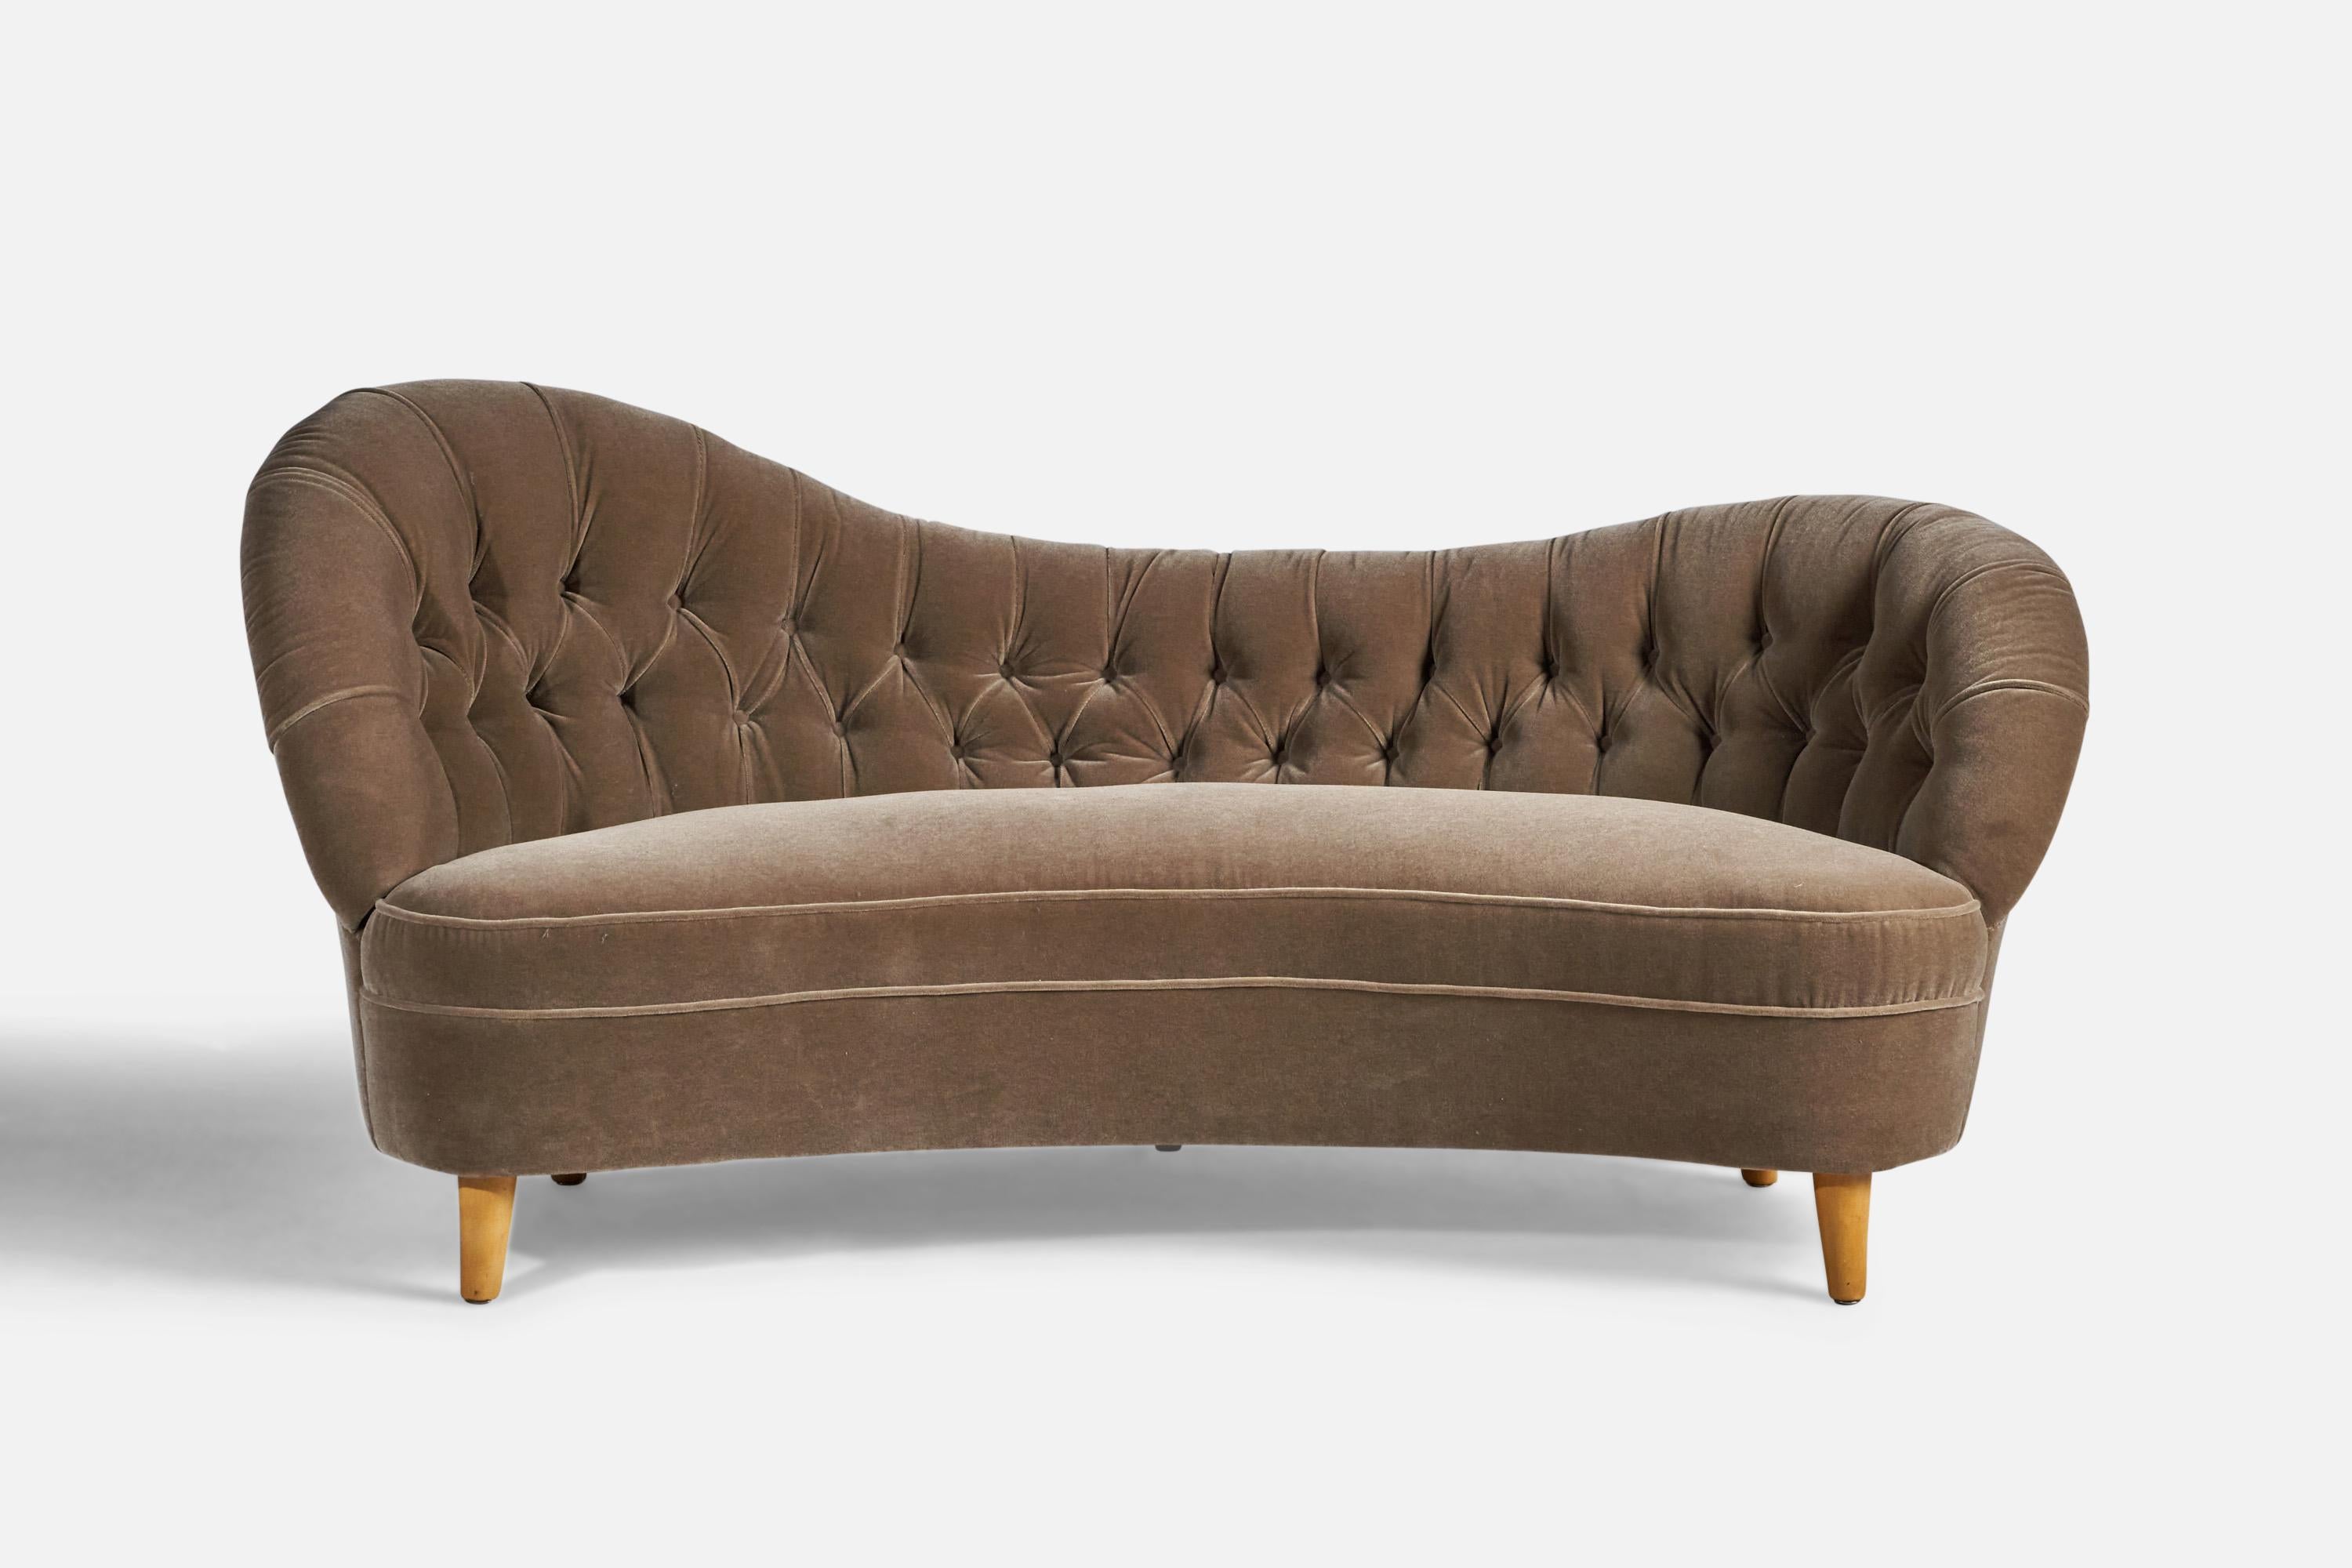 An organic wood and grey mohair sofa, designed by Tor Wolfenstein and produced by Ditzingers, Sweden, c. 1940s.

18